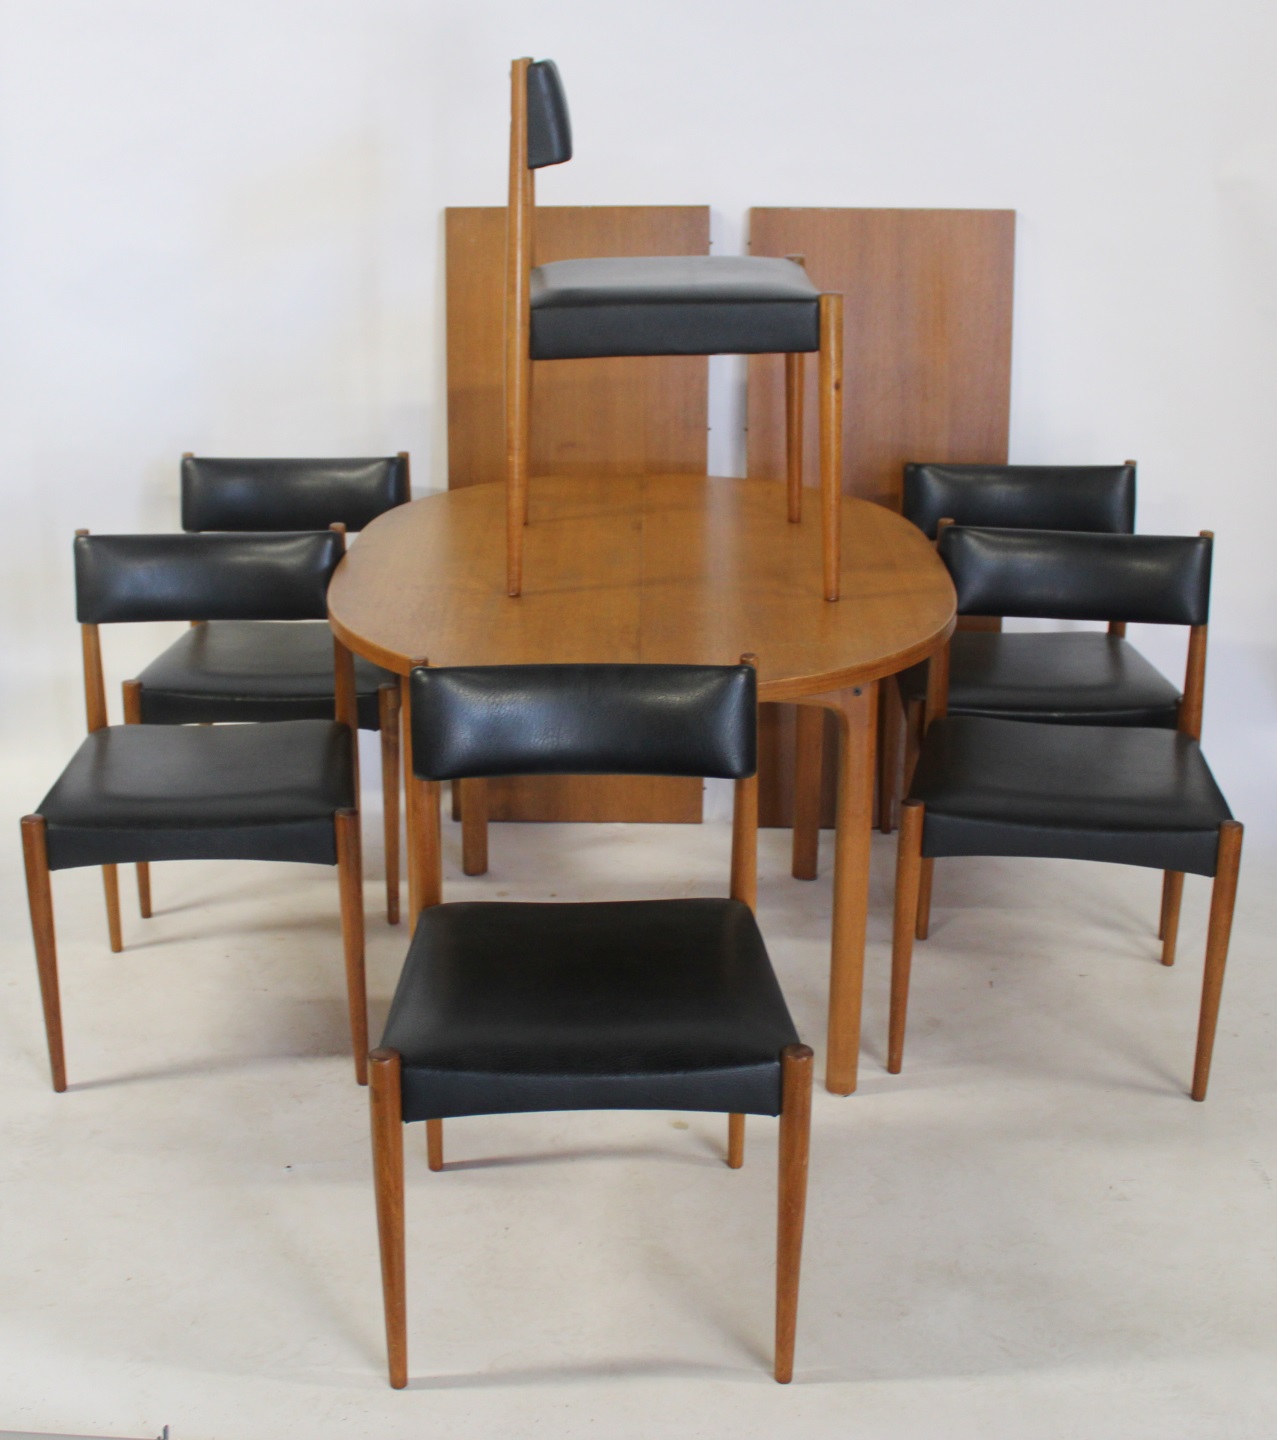 MIDCENTURY DINING TABLE CHAIRS 3bcfa2